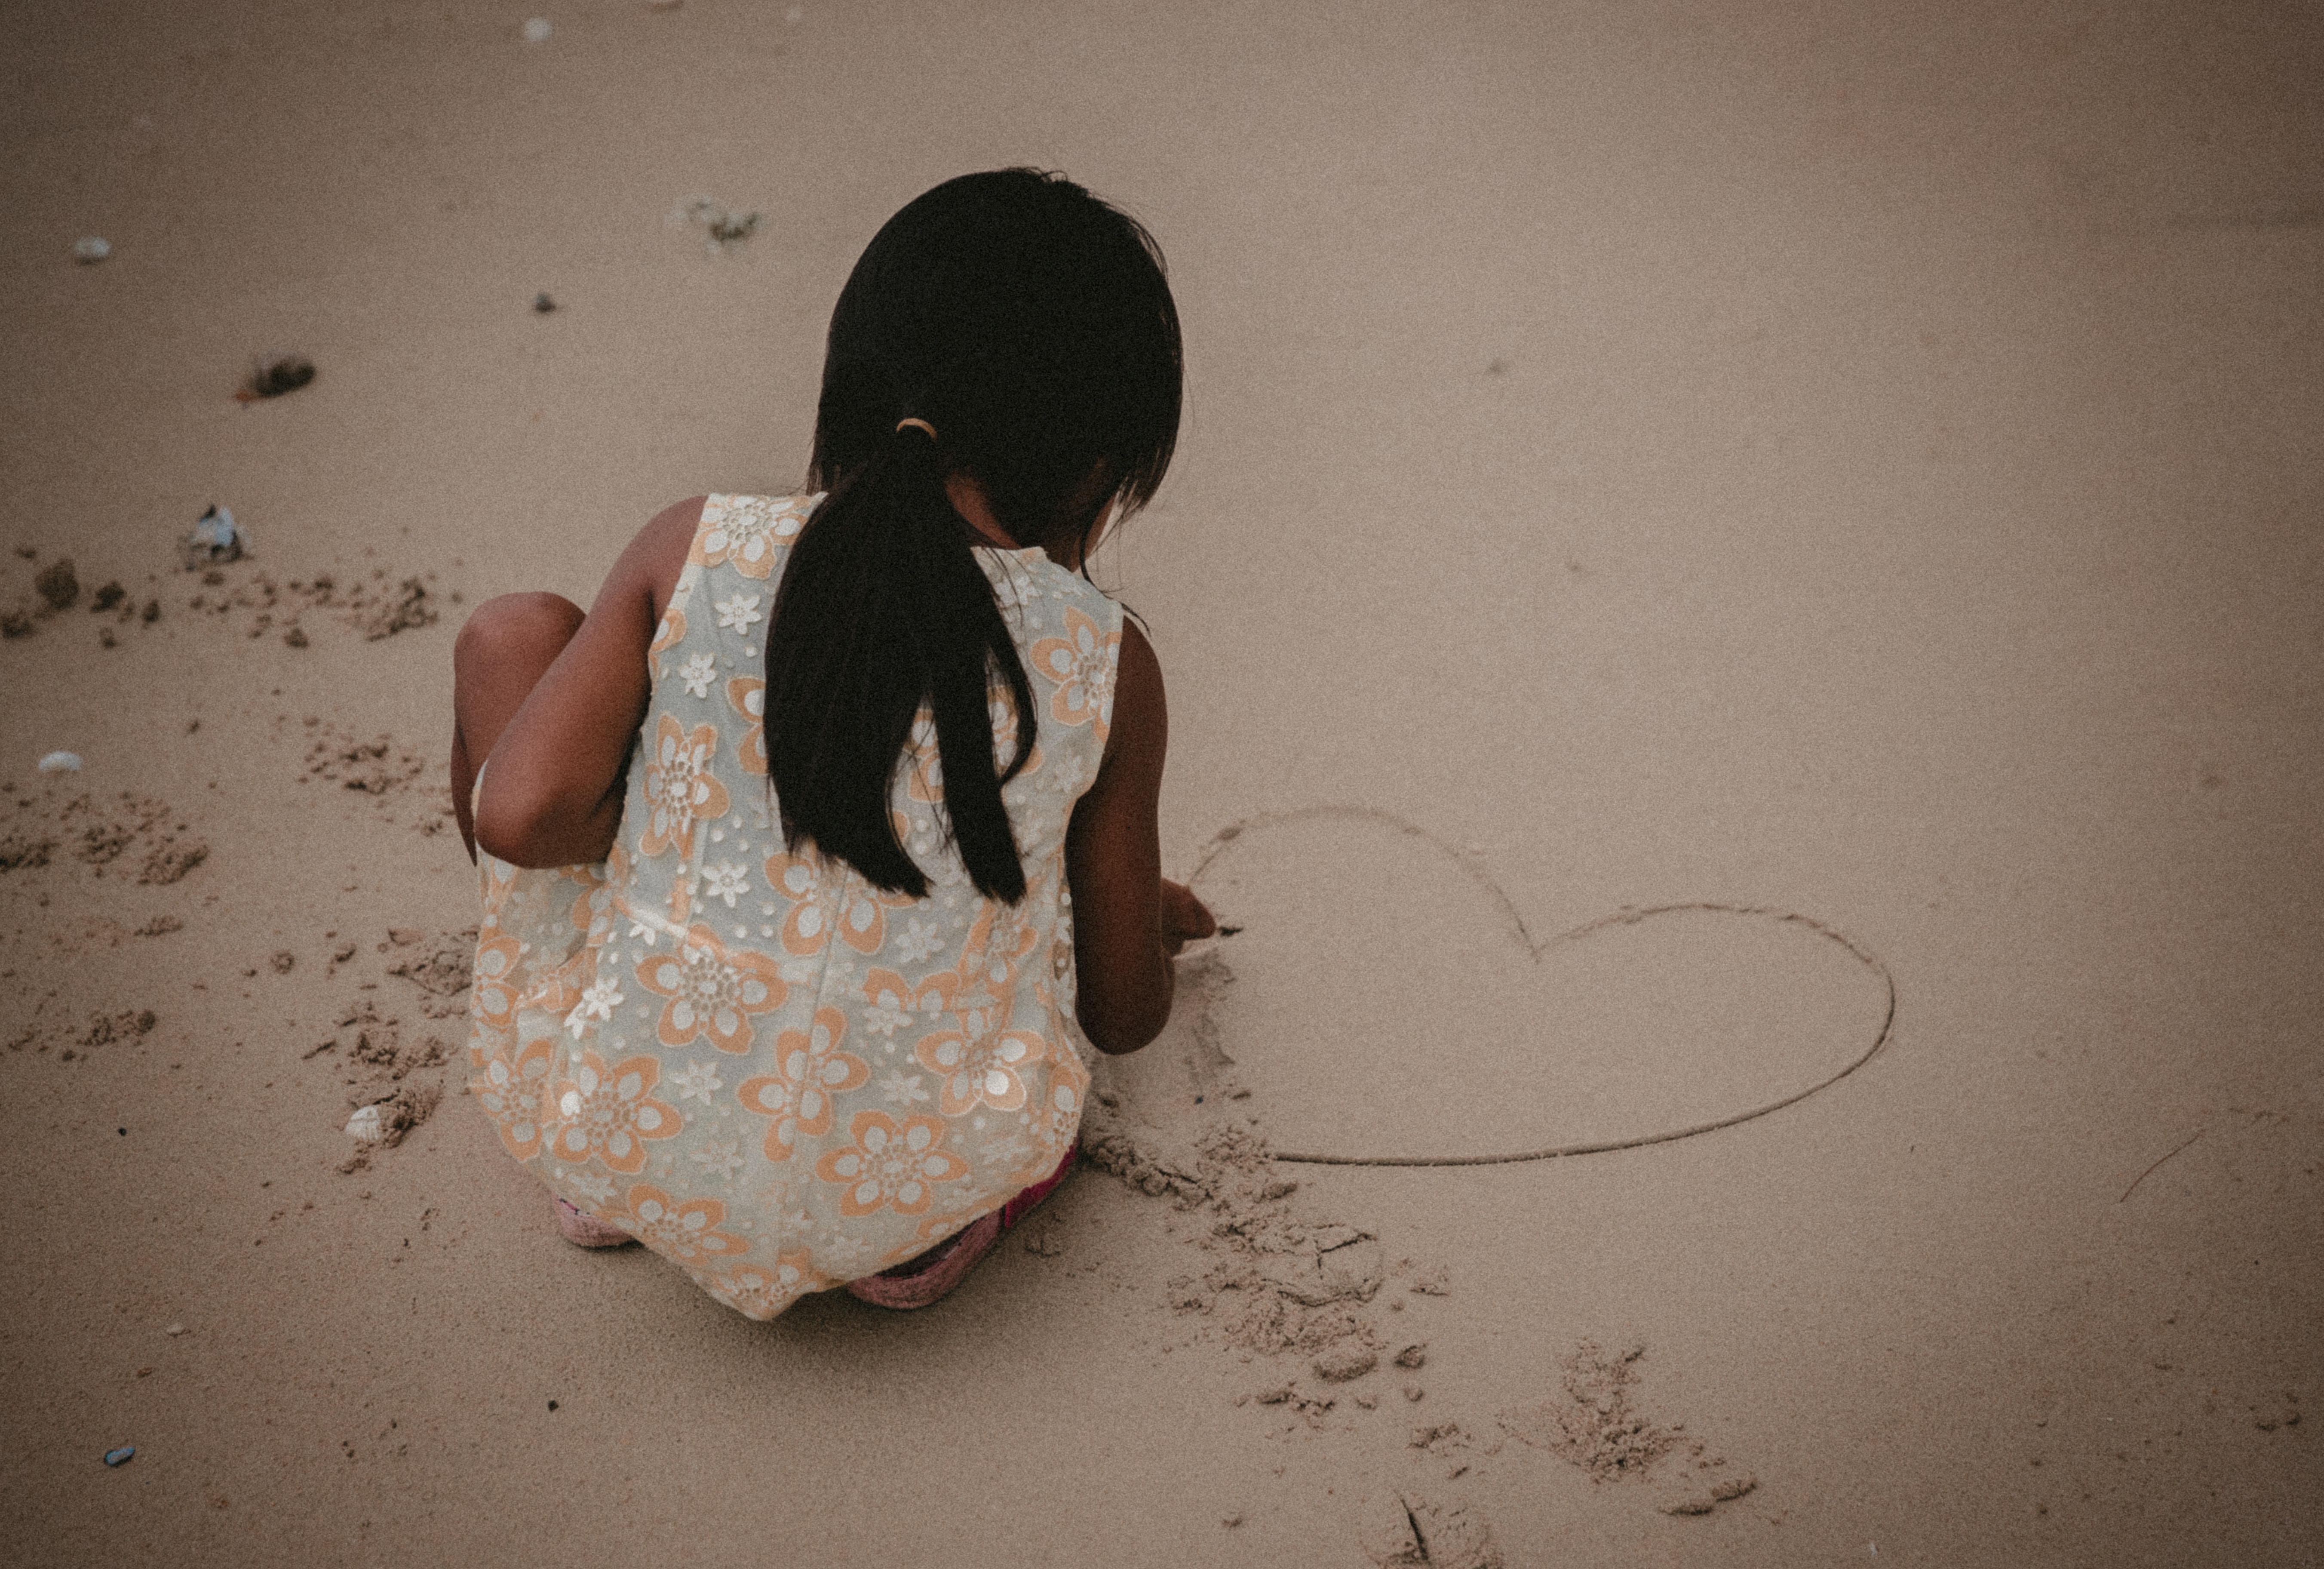 A young, Islander girl drawing a love heart in the sand on a beach.